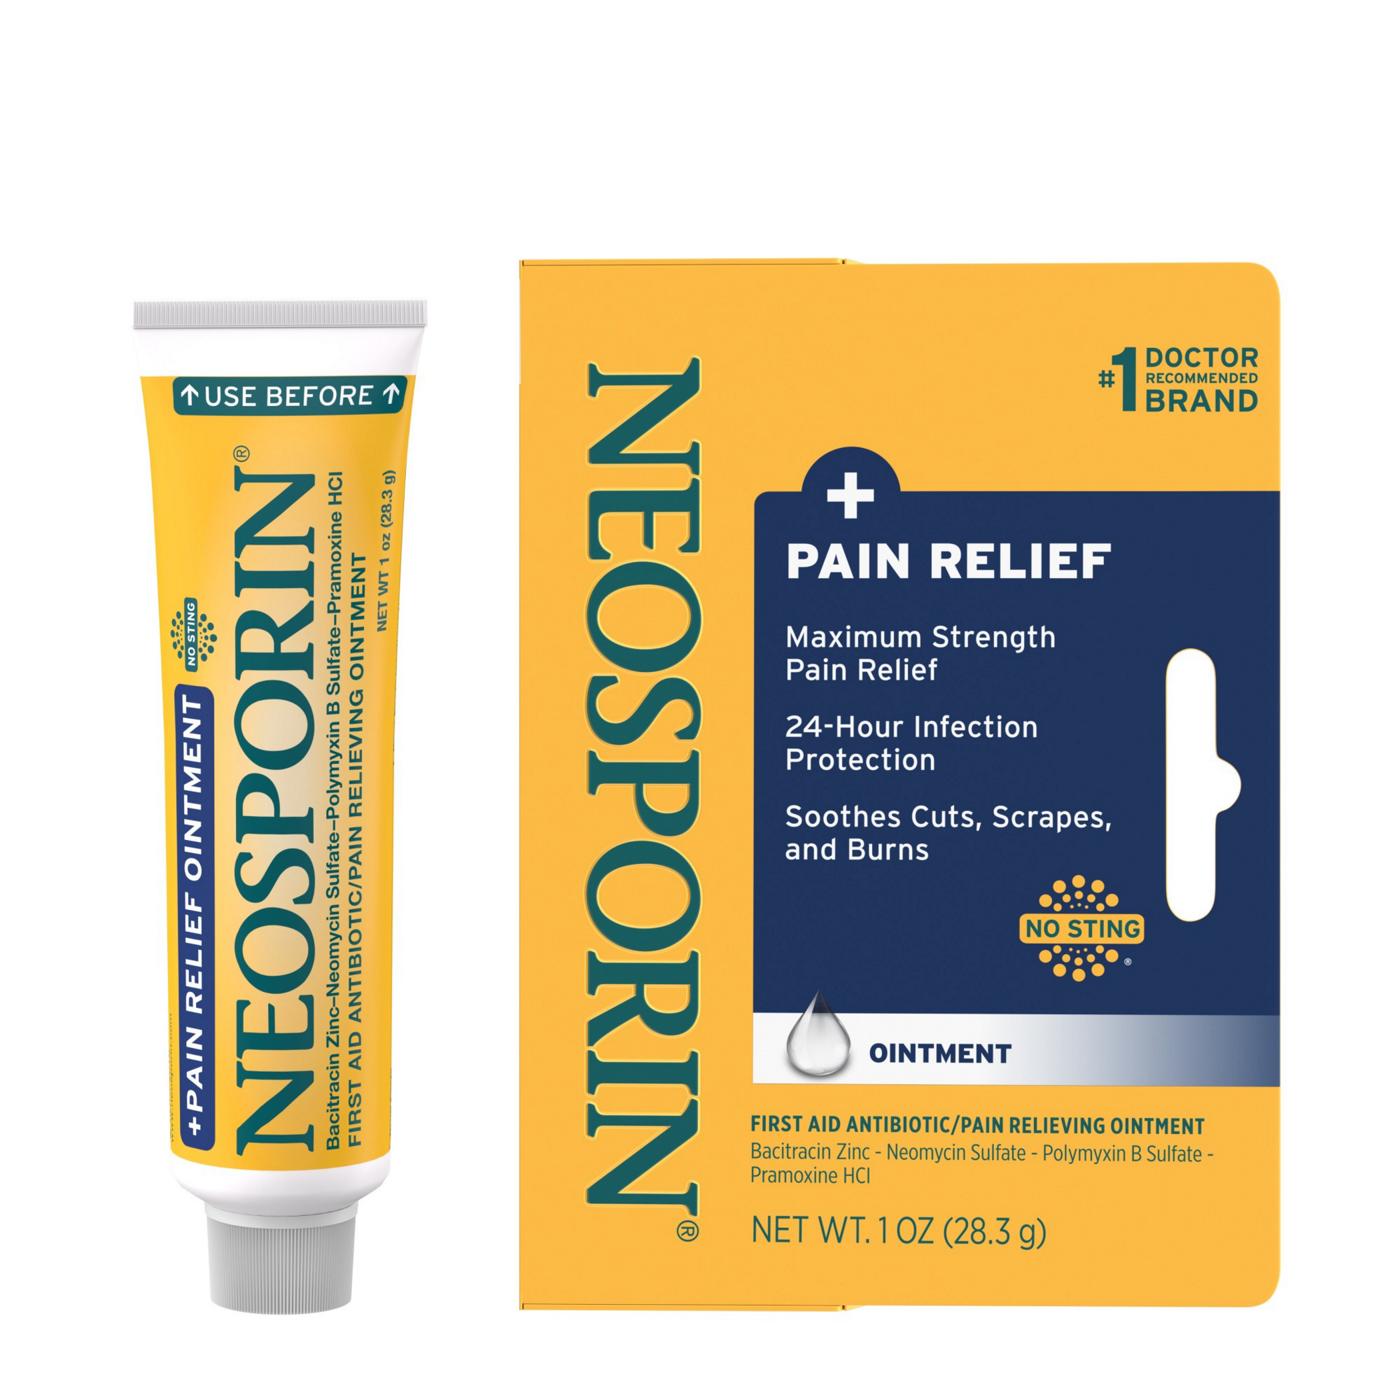 Neosporin + Pain Relief Ointment; image 6 of 7